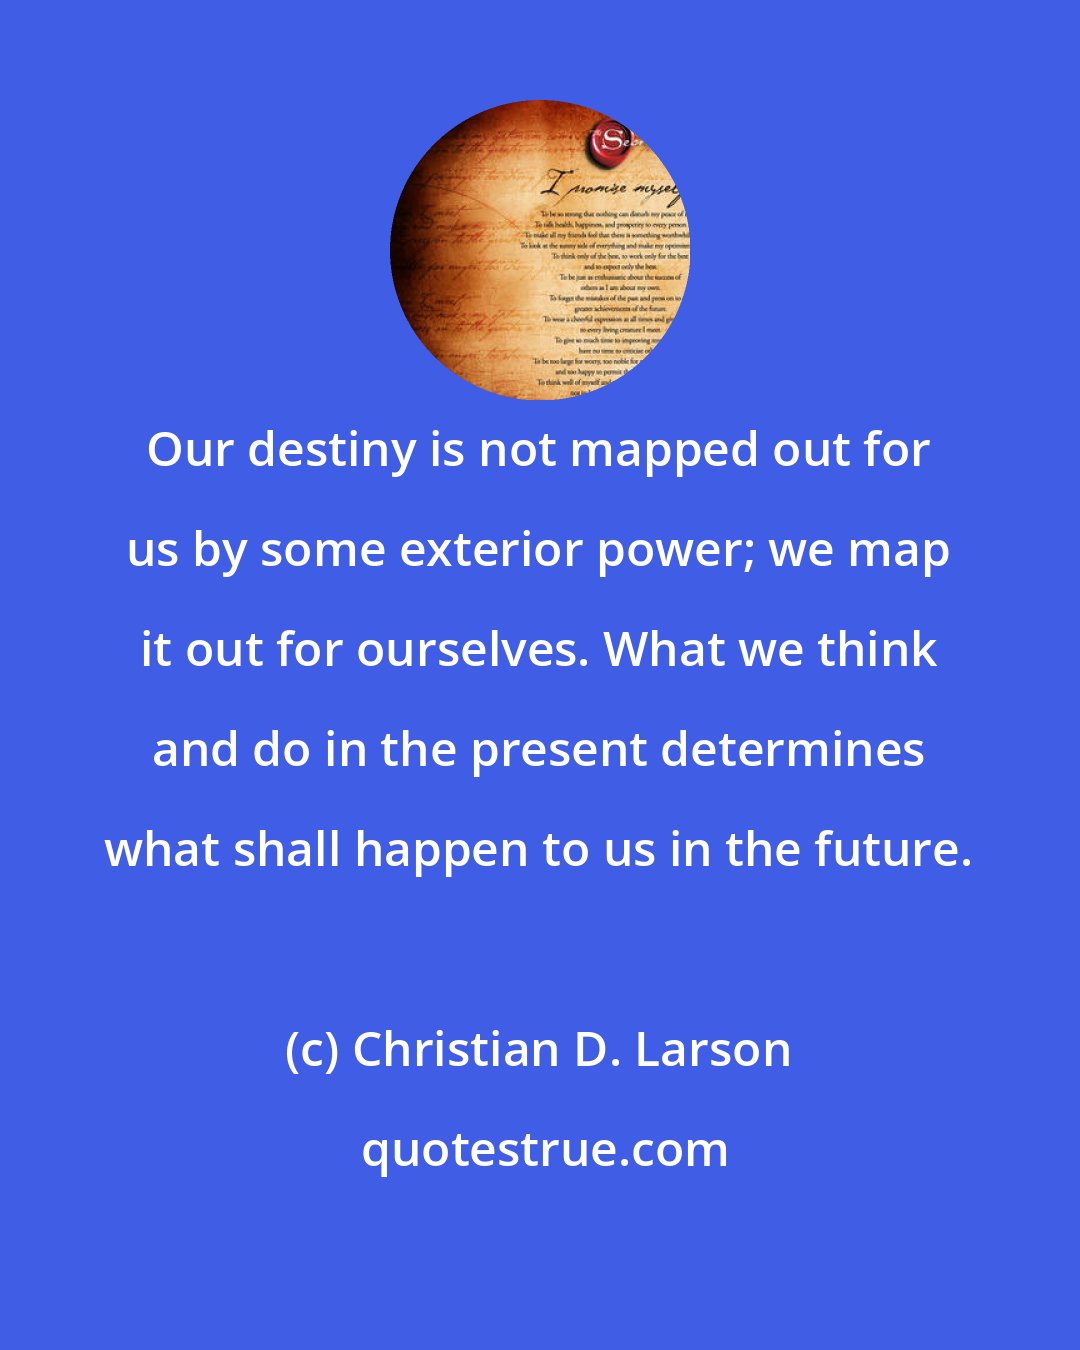 Christian D. Larson: Our destiny is not mapped out for us by some exterior power; we map it out for ourselves. What we think and do in the present determines what shall happen to us in the future.